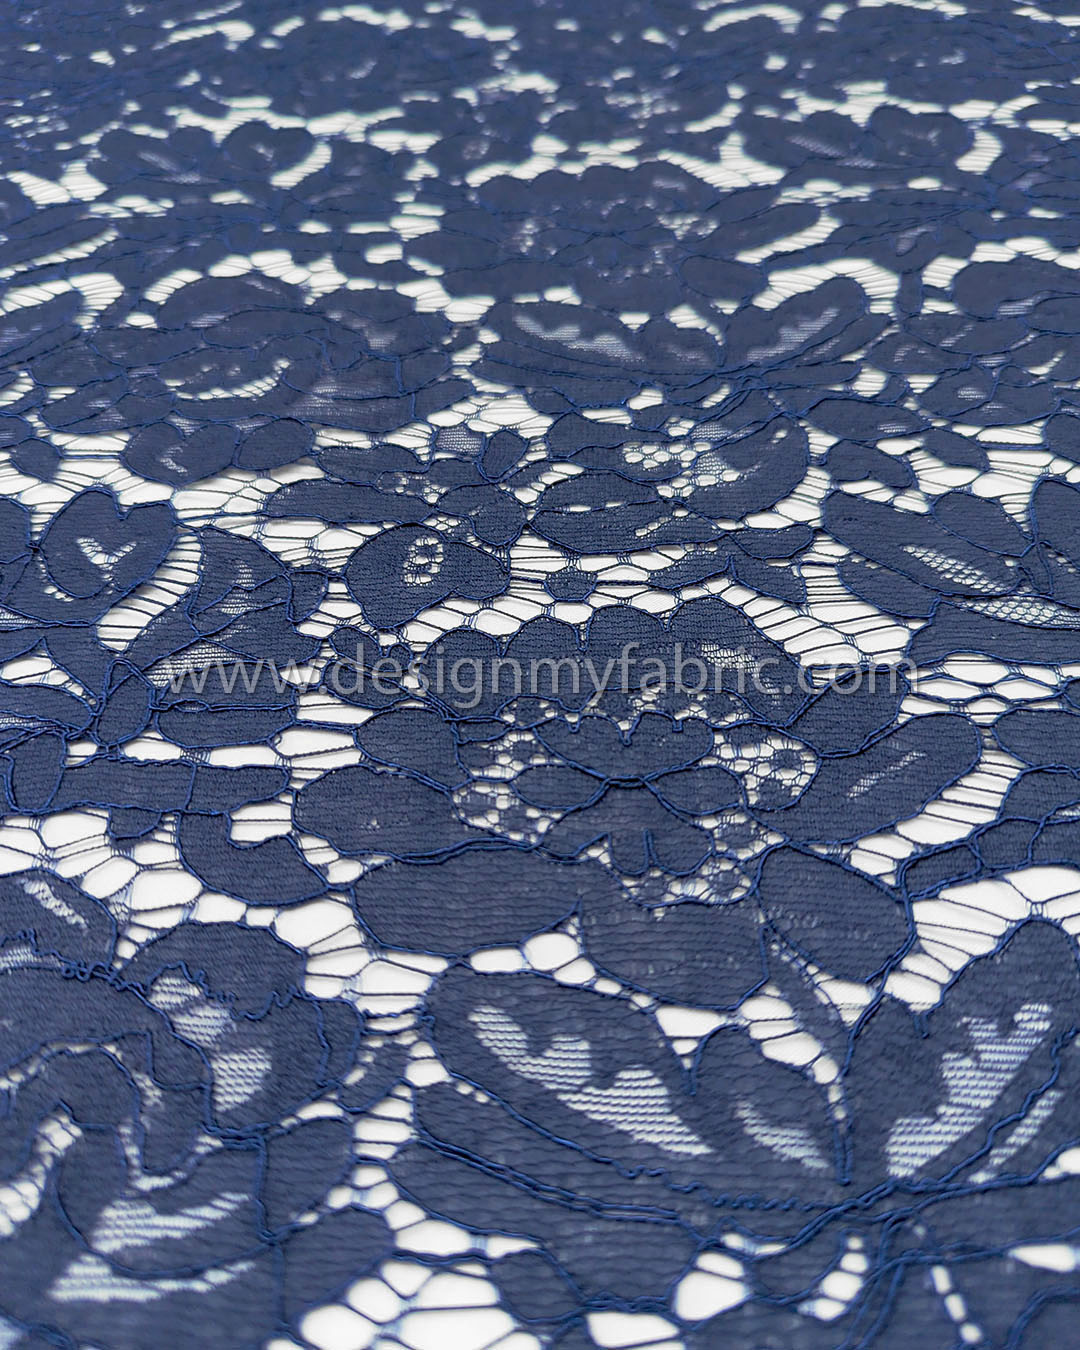 Blue french lace fabric #20575 - Design My Fabric